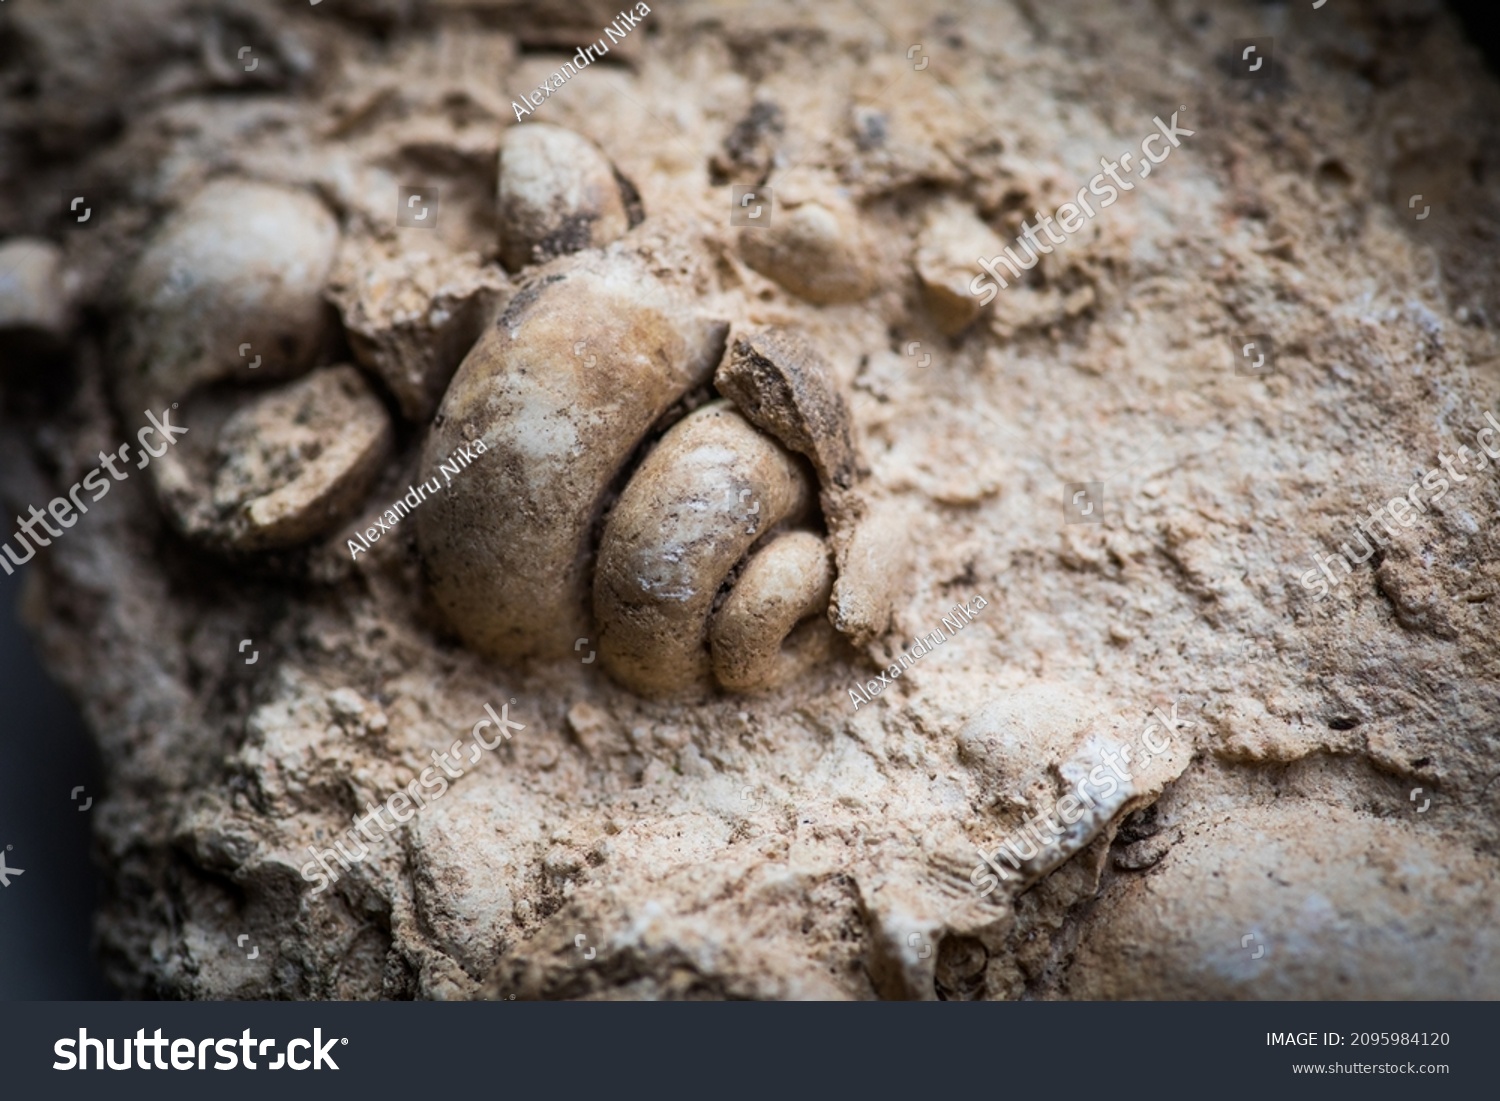 Close up shot of gastropod fossil trapped in sandstone. #2095984120